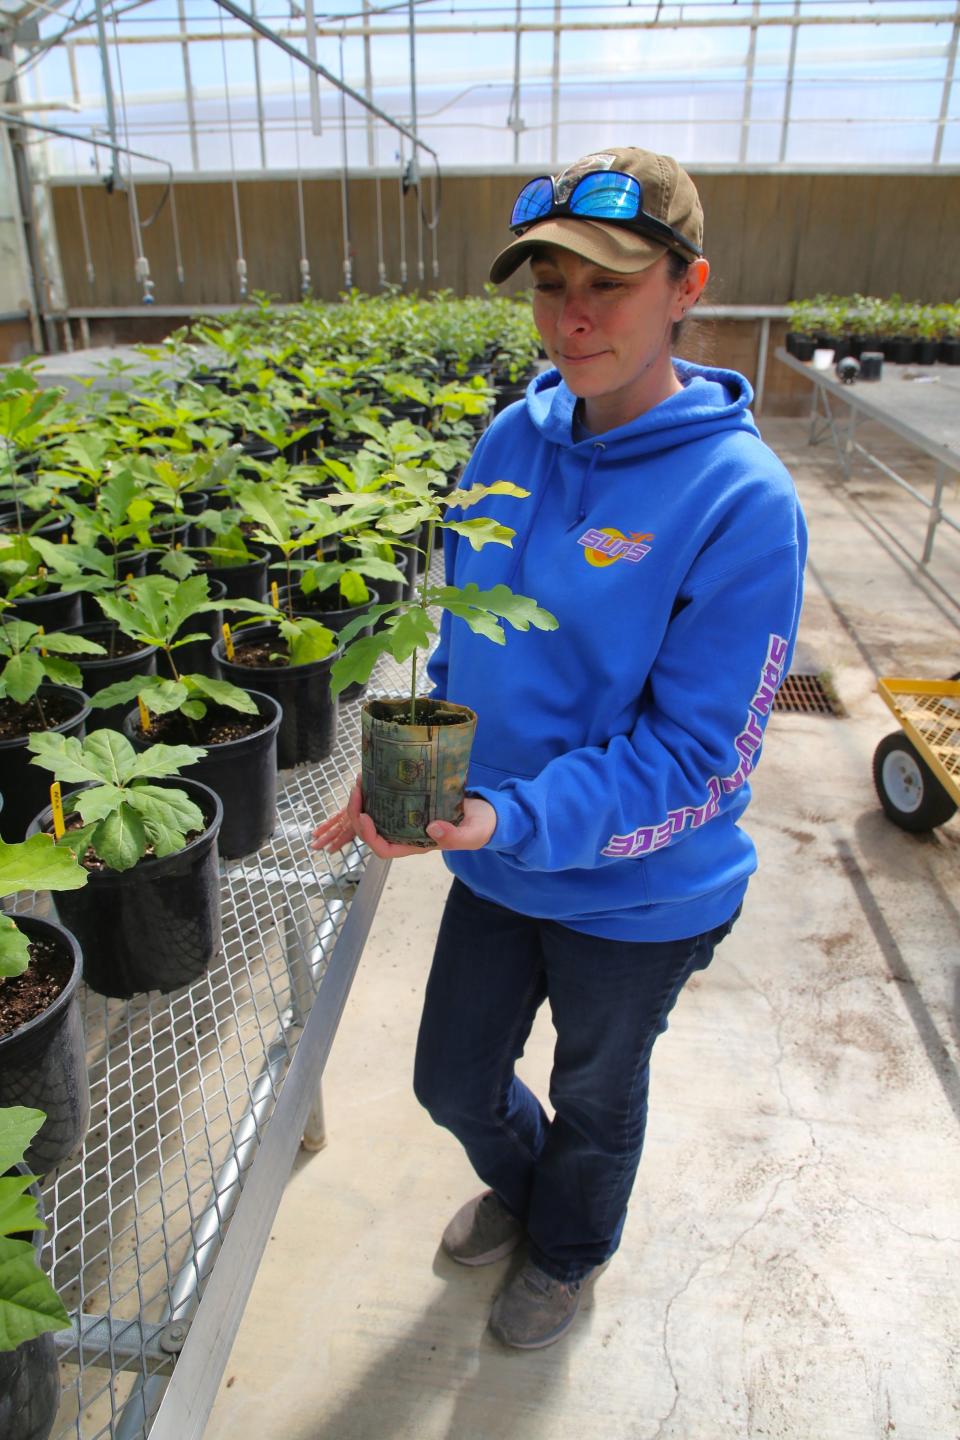 Grounds maintenance supervisor and arborist Aiessa Thomas shows off one of the approximately 1,000 tree seedlings that will be given away on the San Juan College campus in Farmington on Friday, April 26 in observation of Arbor Day.